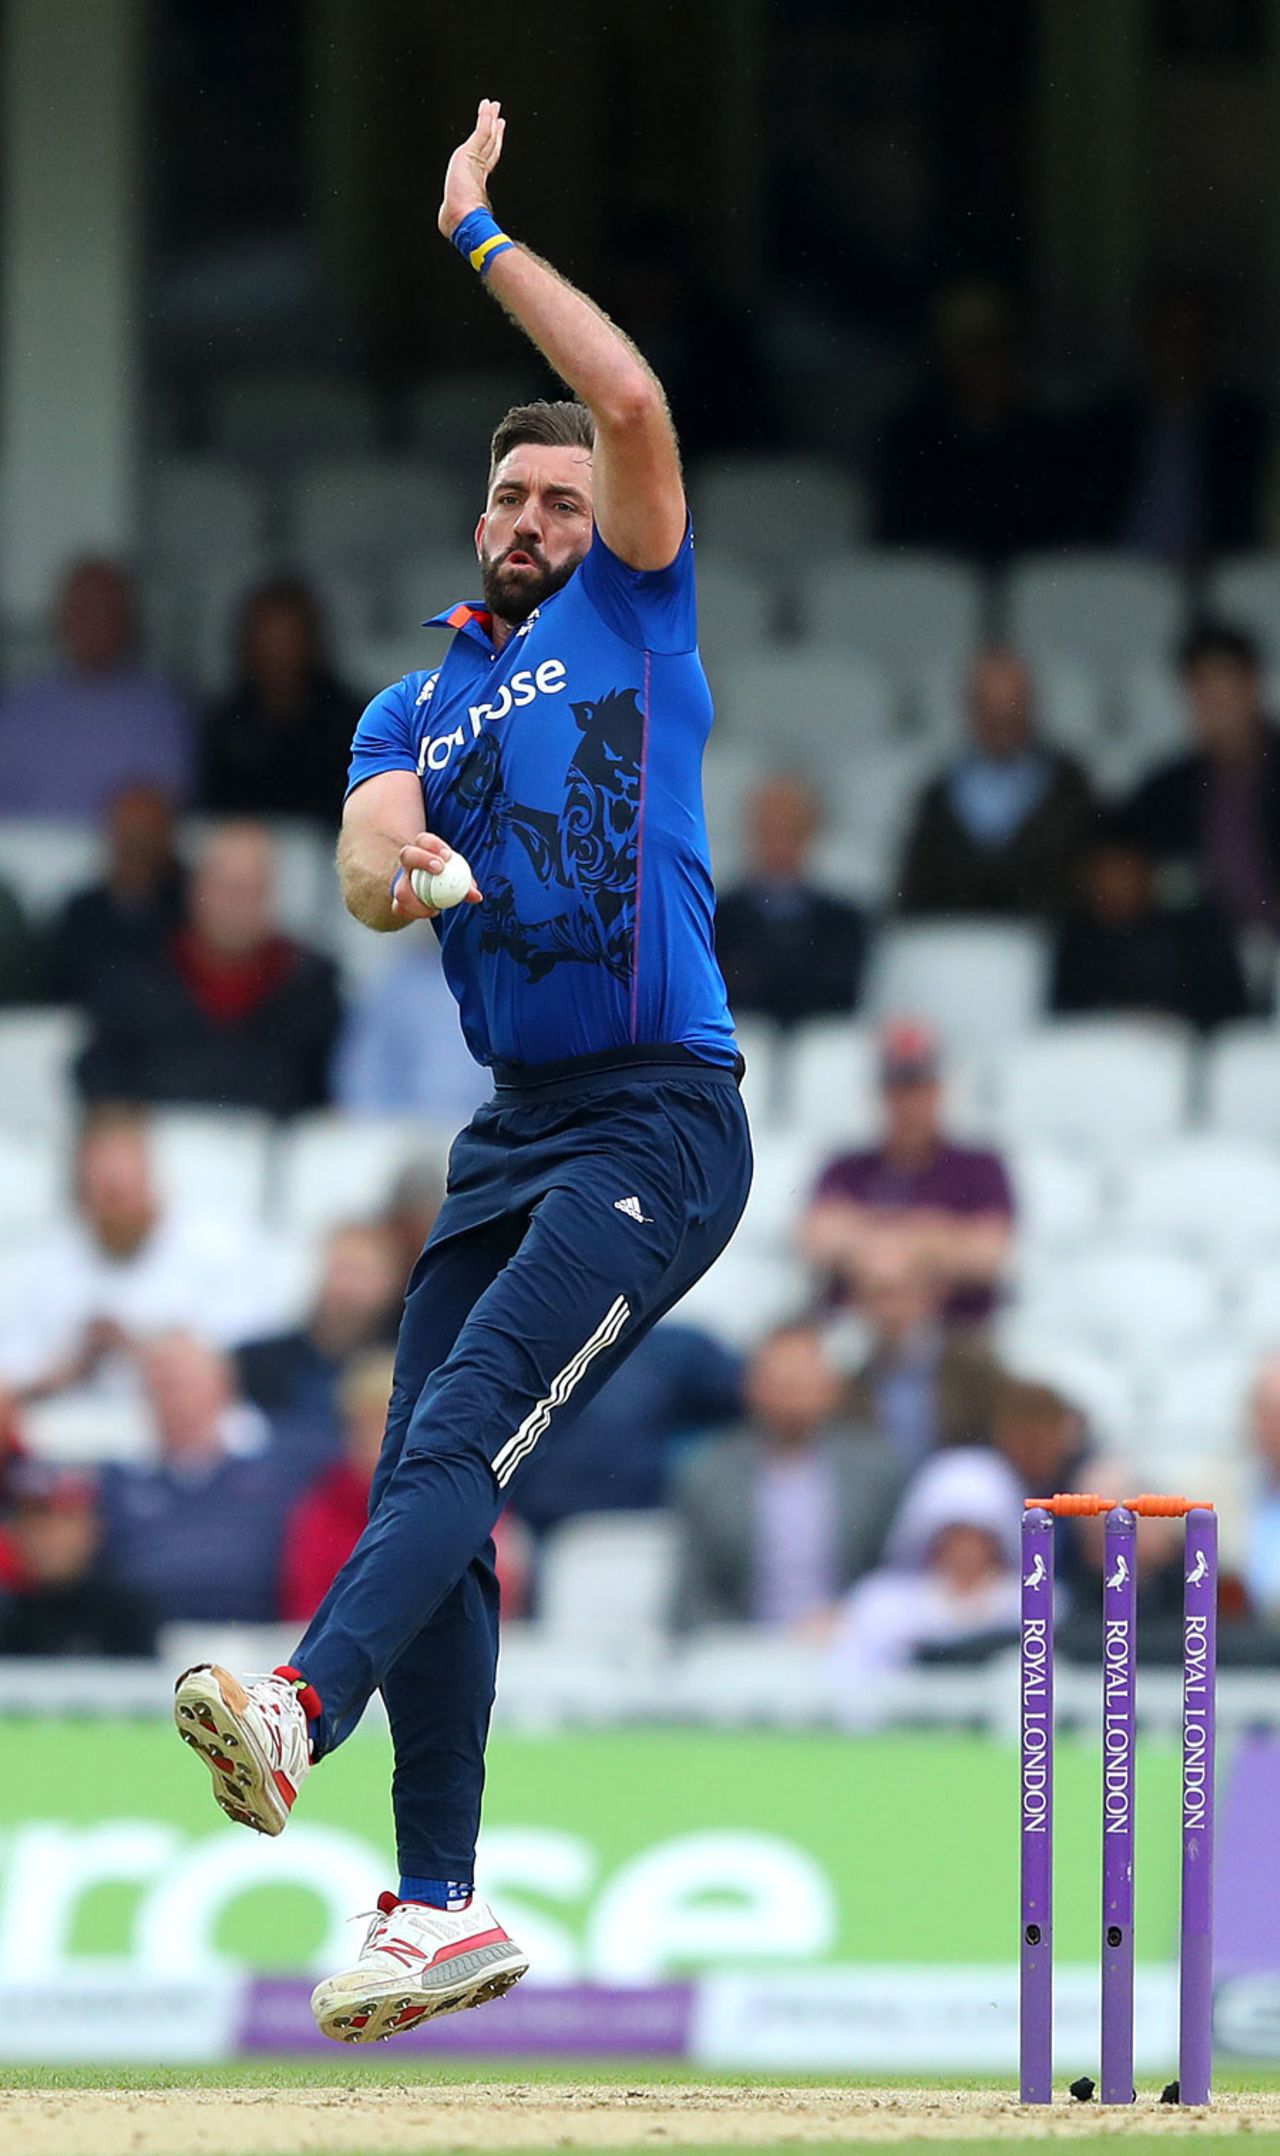 Liam Plunkett couldn't make an early breakthrough on this occasion, England v Sri Lanka, 4th ODI, The Oval, June 29, 2016